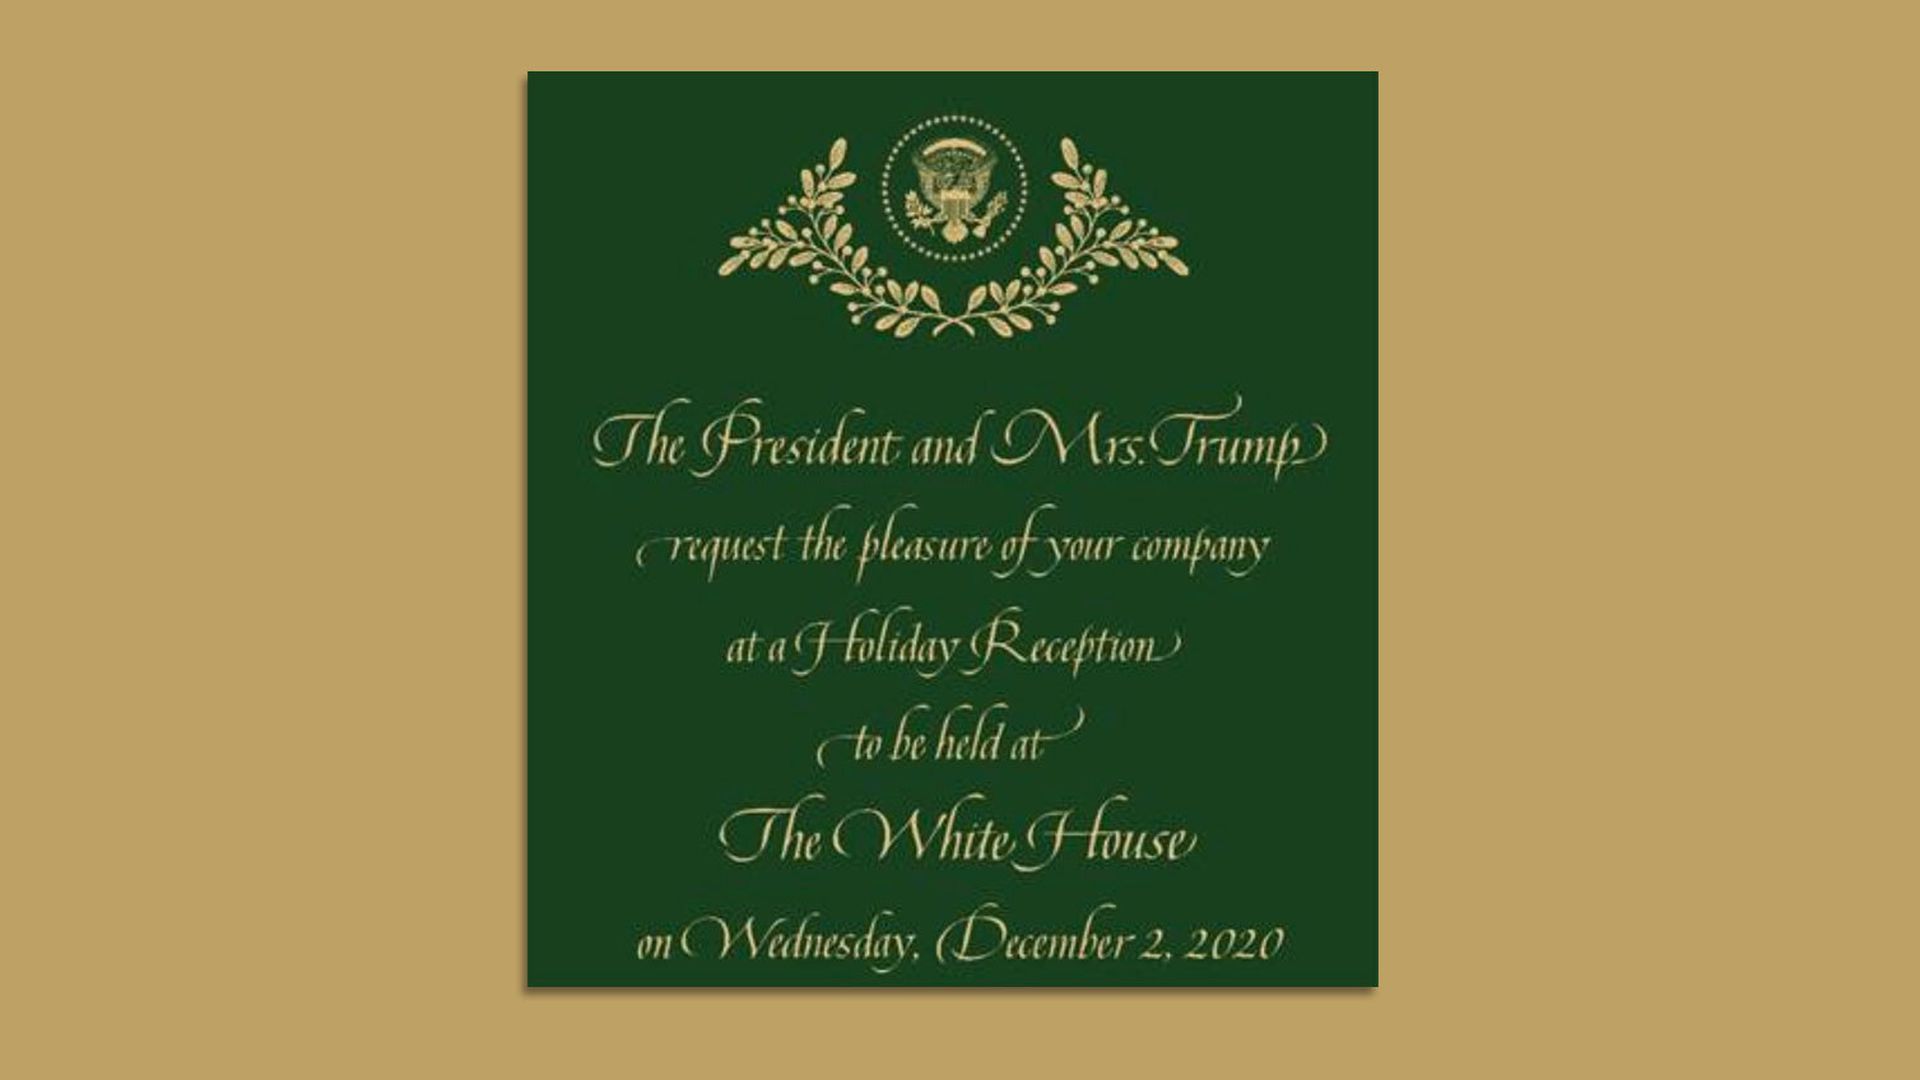 A copy of an invitation to a White House dinner